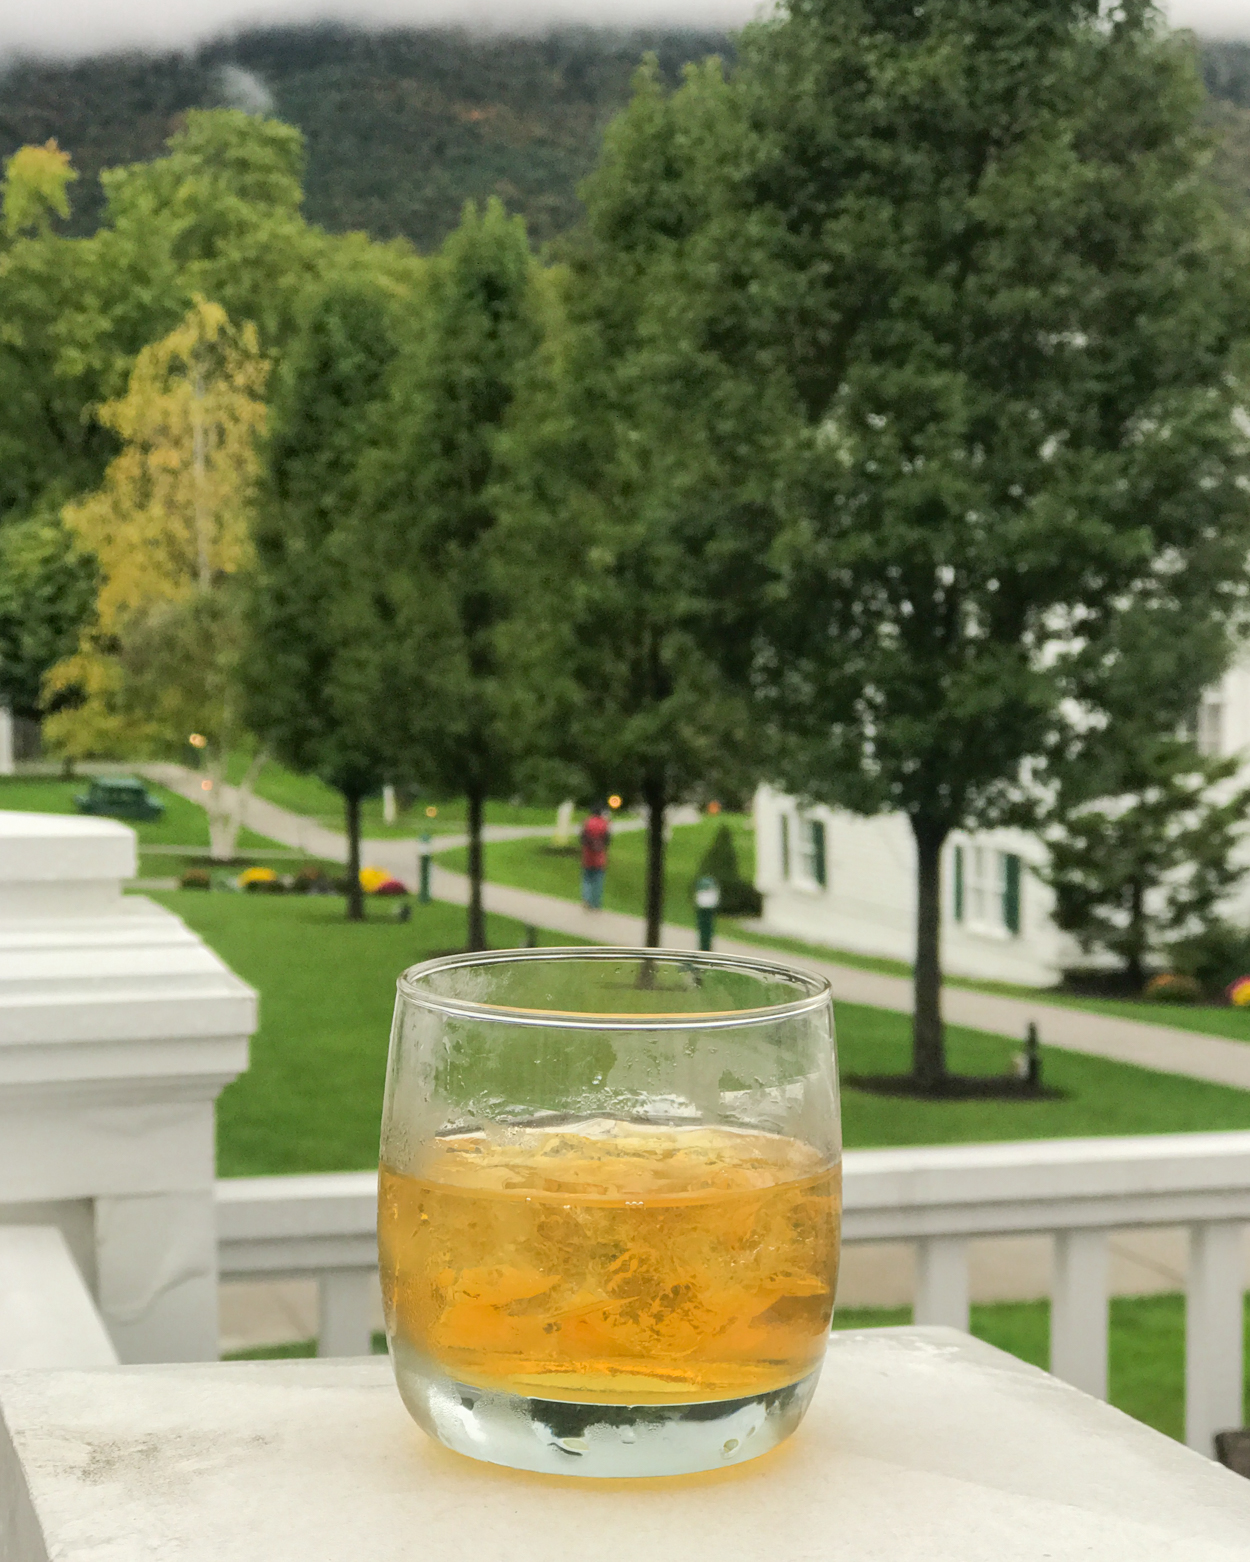 Sazarac drink on the patio at the Equinox Resort in Manchester Vermont 